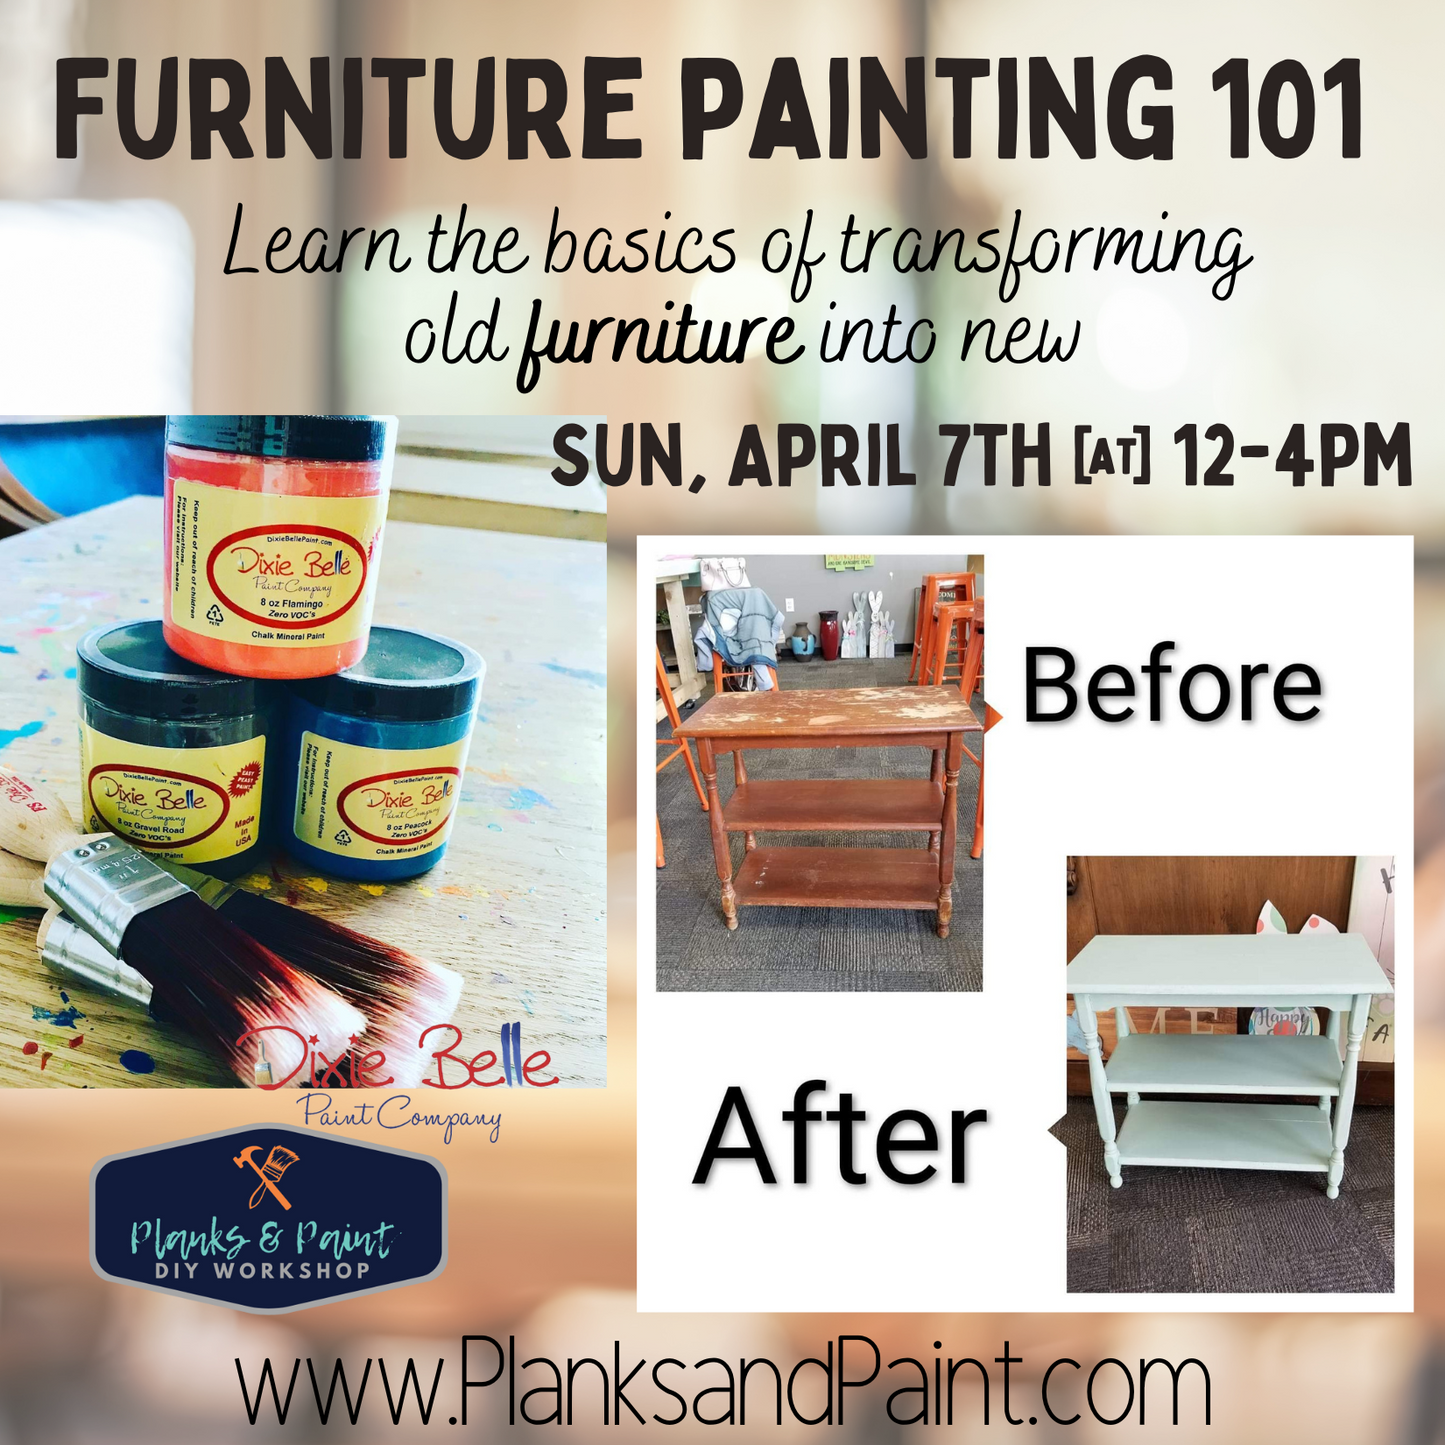 Furniture Painting 101 - 4/7/24 @ 12-4pm